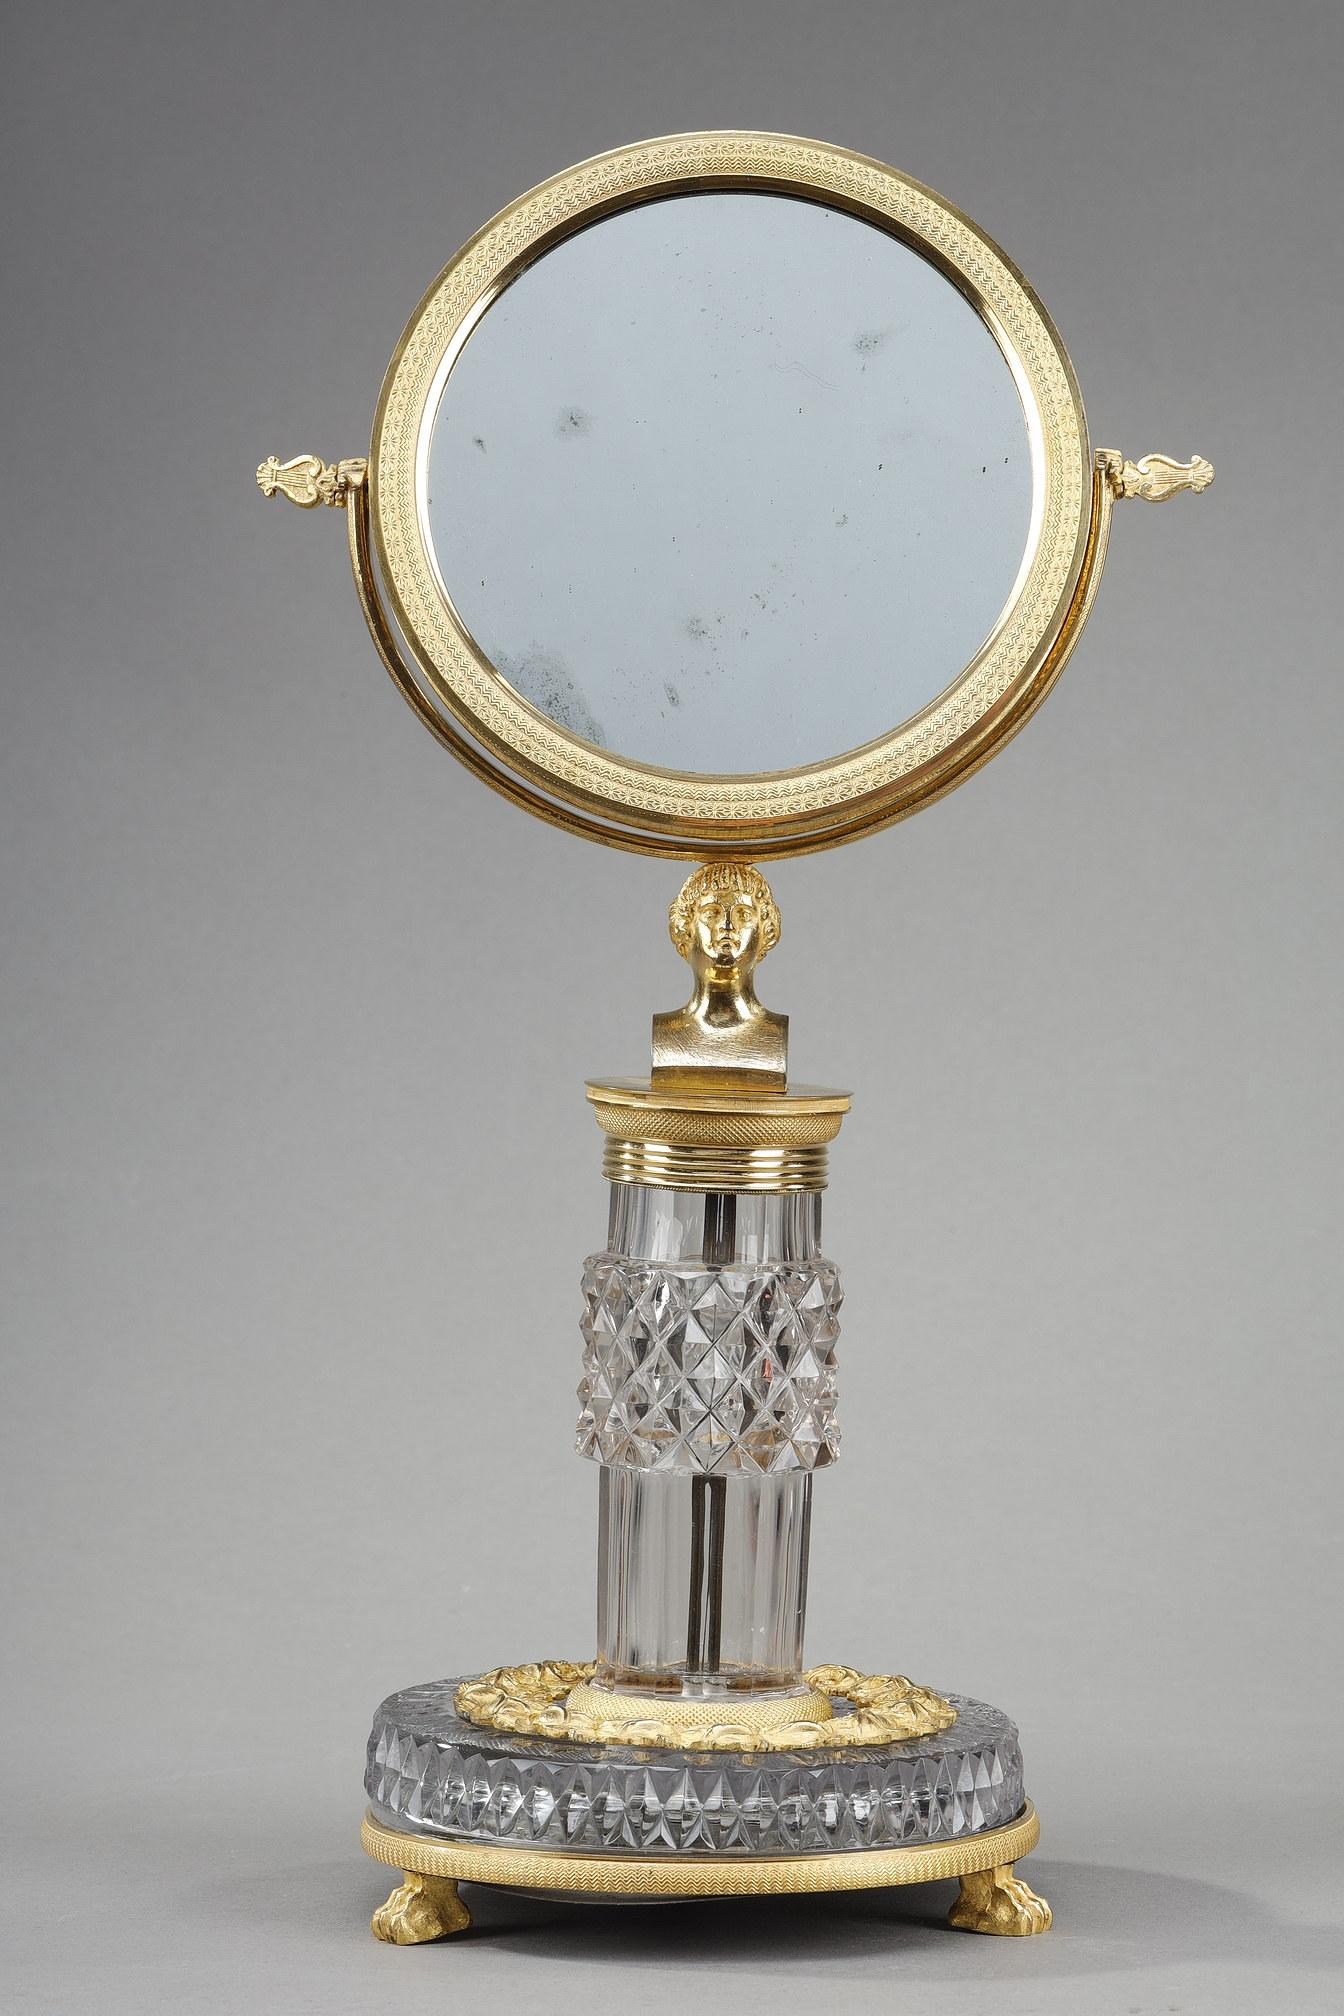 Charles X toilet mirror in cut crystal and gilt bronze. The circular mirror with its guilloché border is mounted on a rotating system attached to a diamond-tipped crystal shaft. The circular base with flower garland rests on claw feet. Work in the